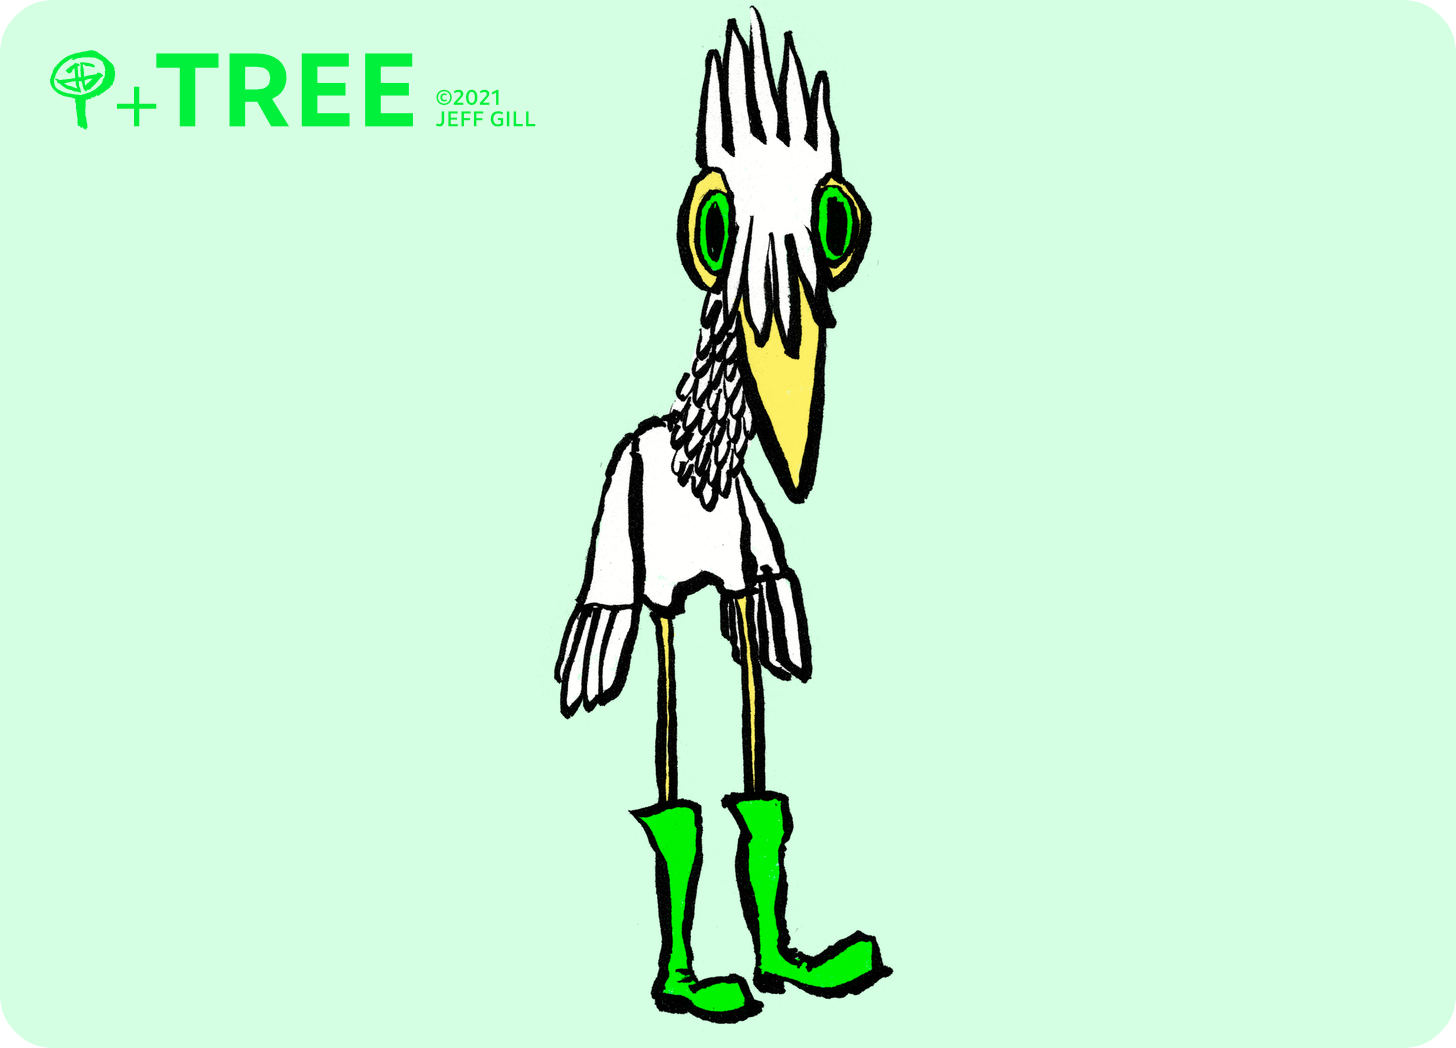 An illustration of a tall white bird with green eyes wearing tall green boots